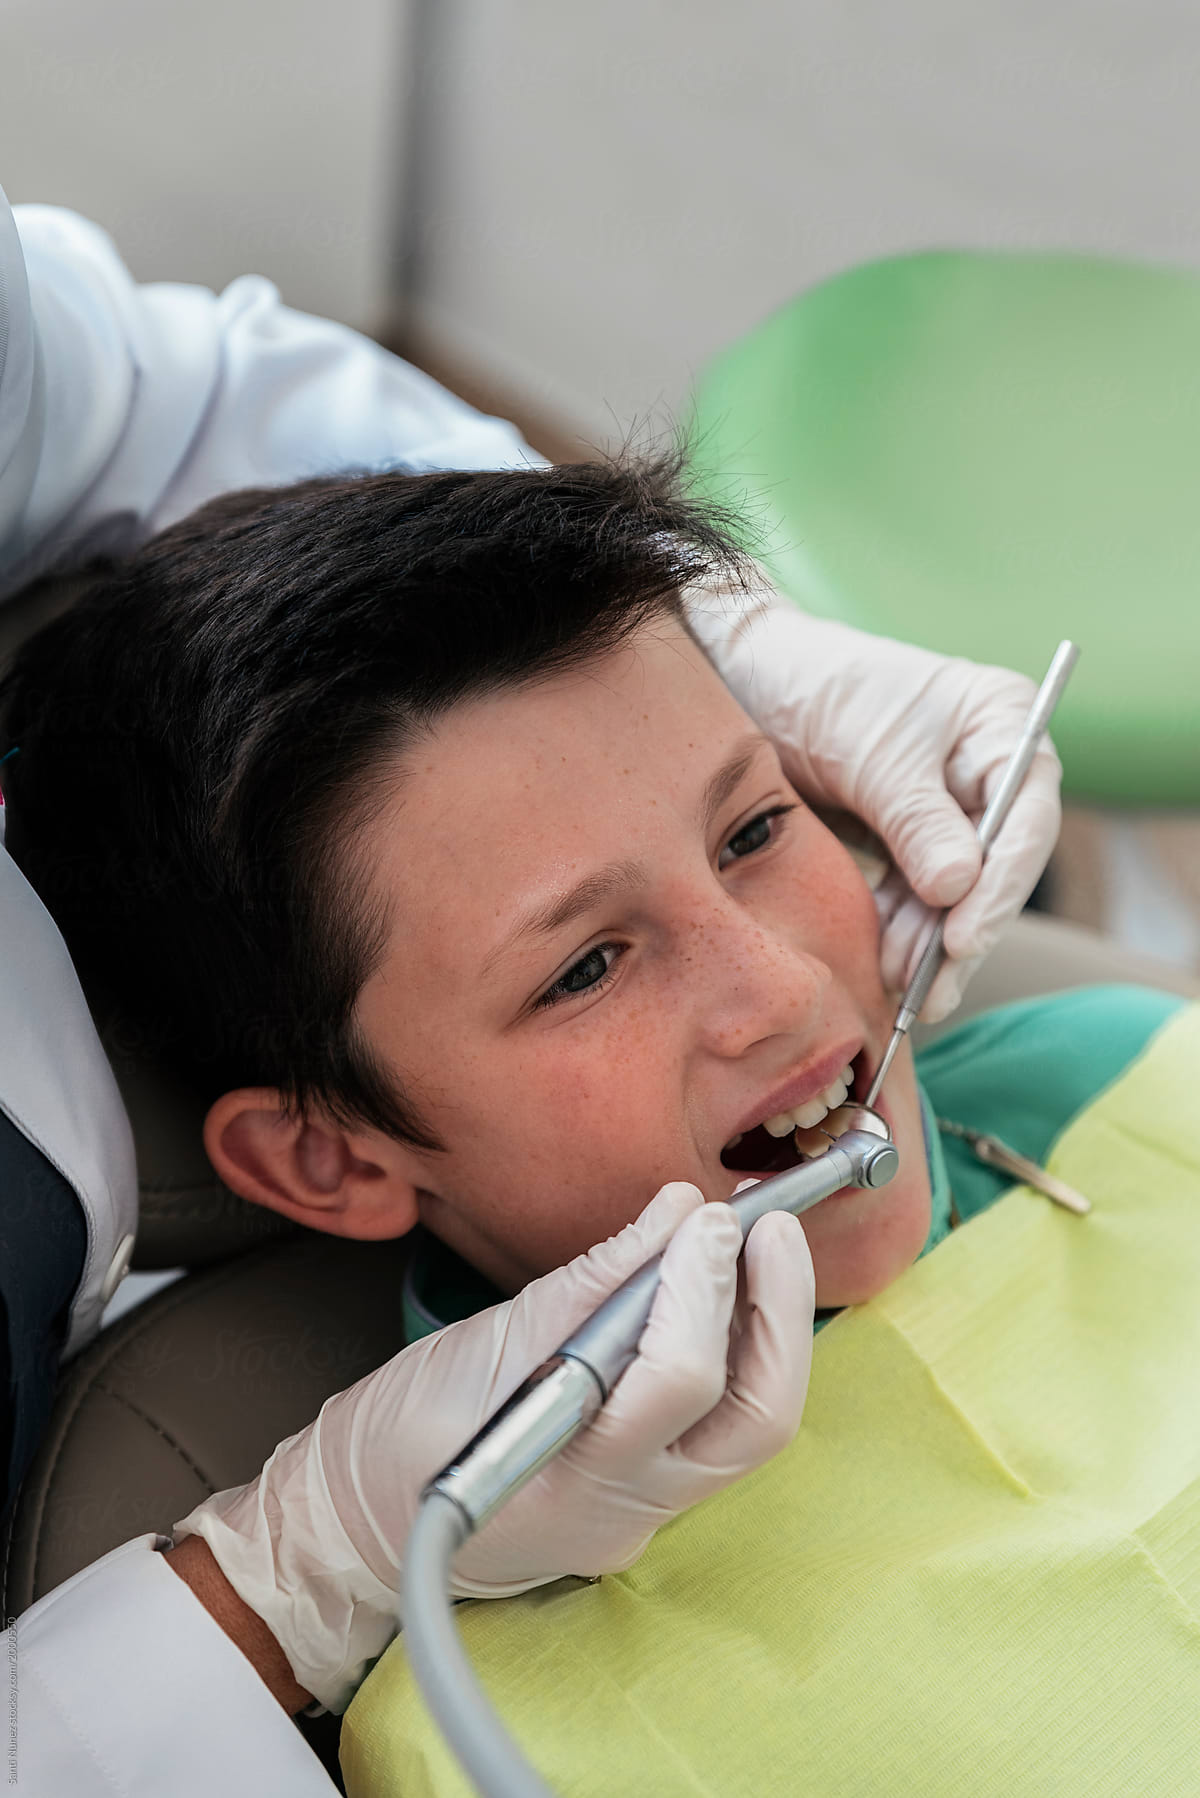 Dentist during a dental intervention with a patient.